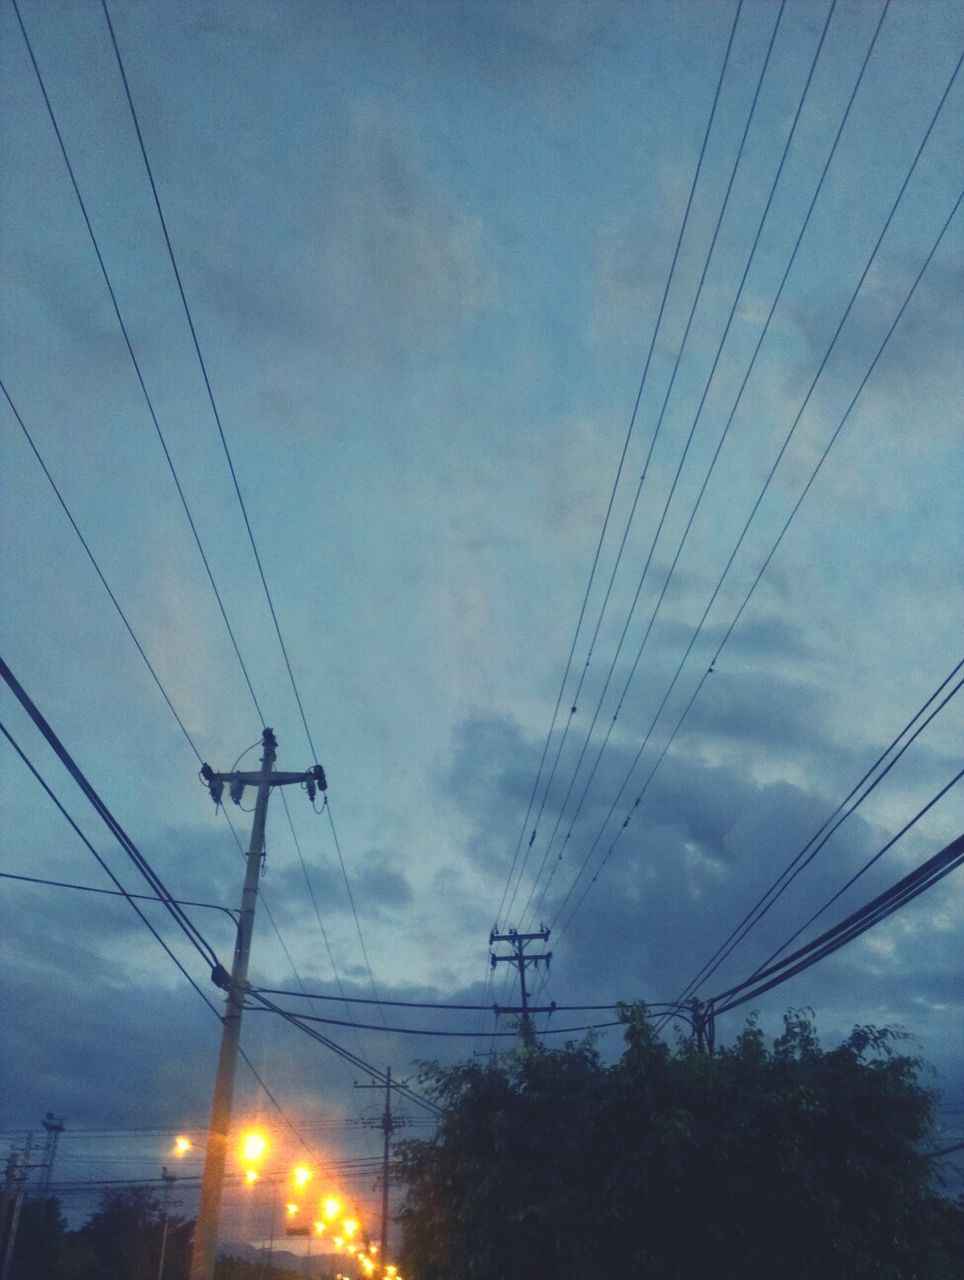 power line, electricity pylon, electricity, power supply, cable, low angle view, connection, sky, fuel and power generation, technology, power cable, cloud - sky, silhouette, complexity, cloudy, dusk, blue, no people, outdoors, lighting equipment